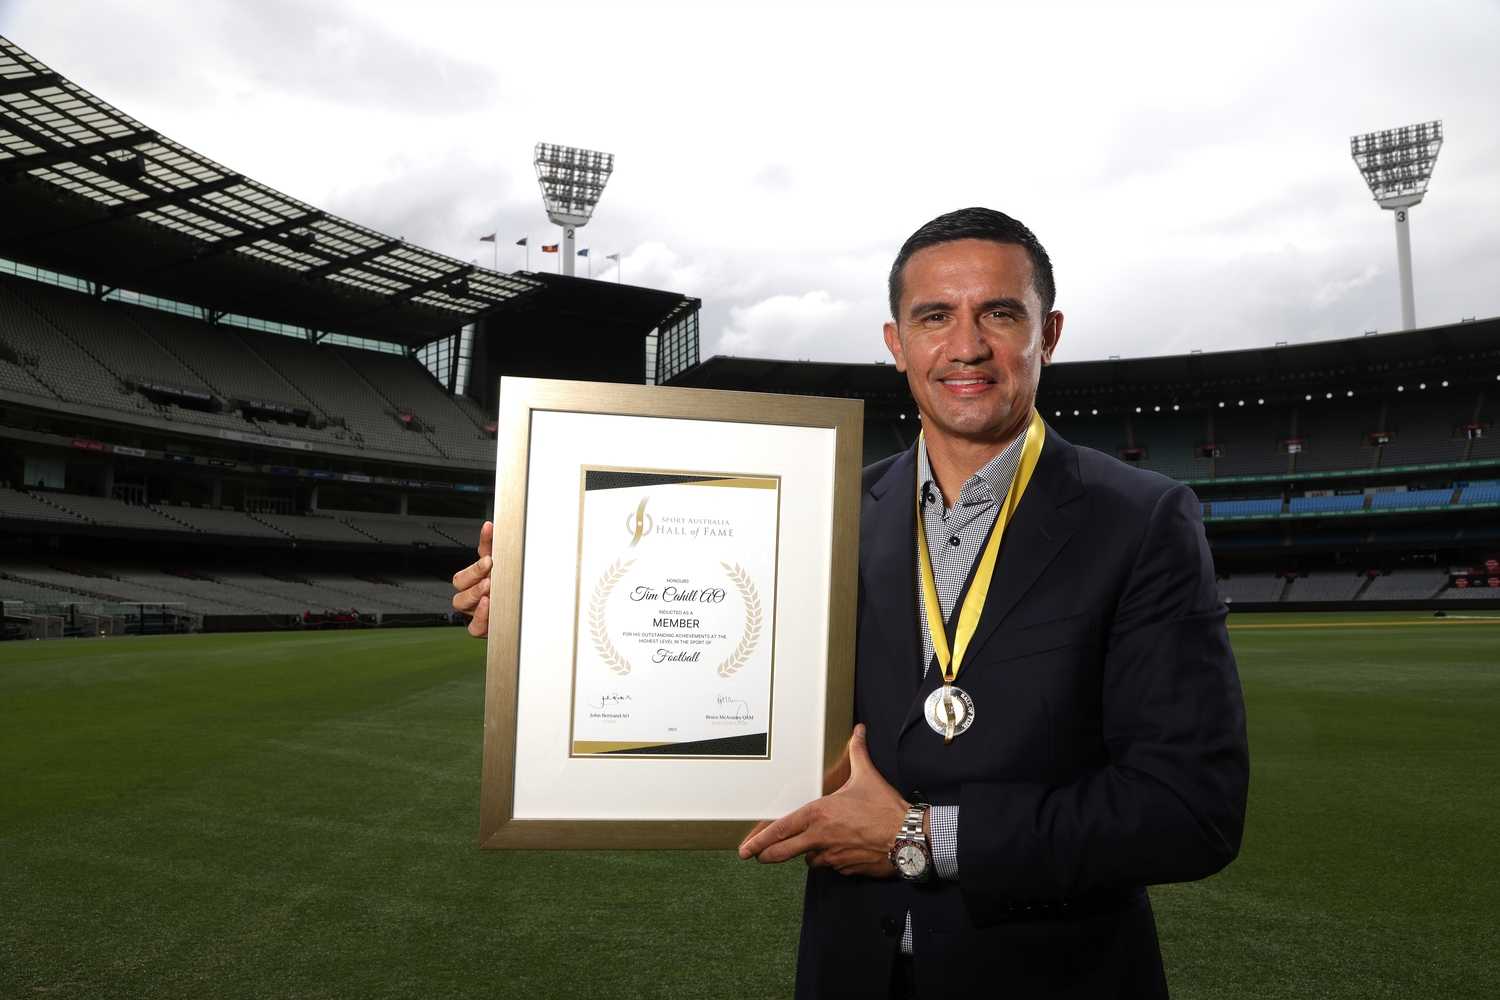 Tim Cahill AO being inducted into the Sport Australia Hall of Fame.